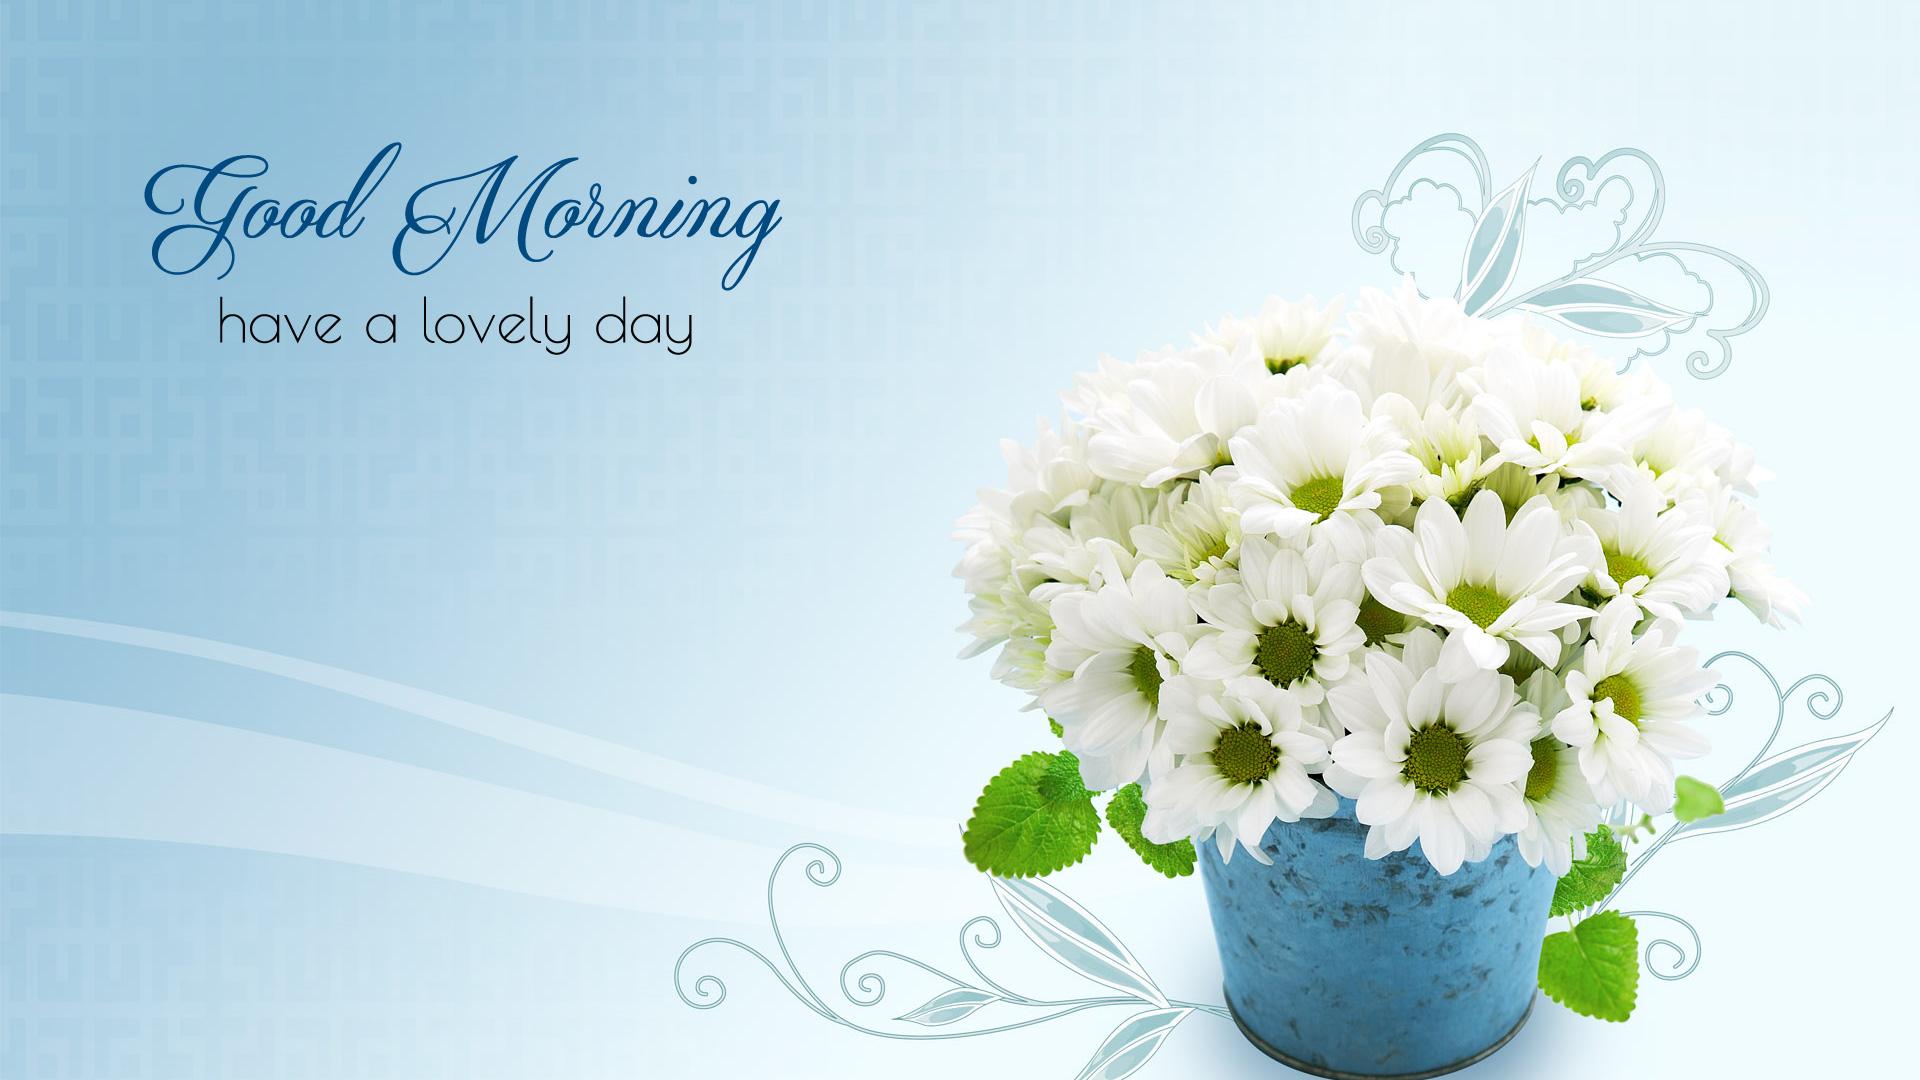 Good Morning Wallpaper with Flowers, Full HD 1920x1080 GM Image